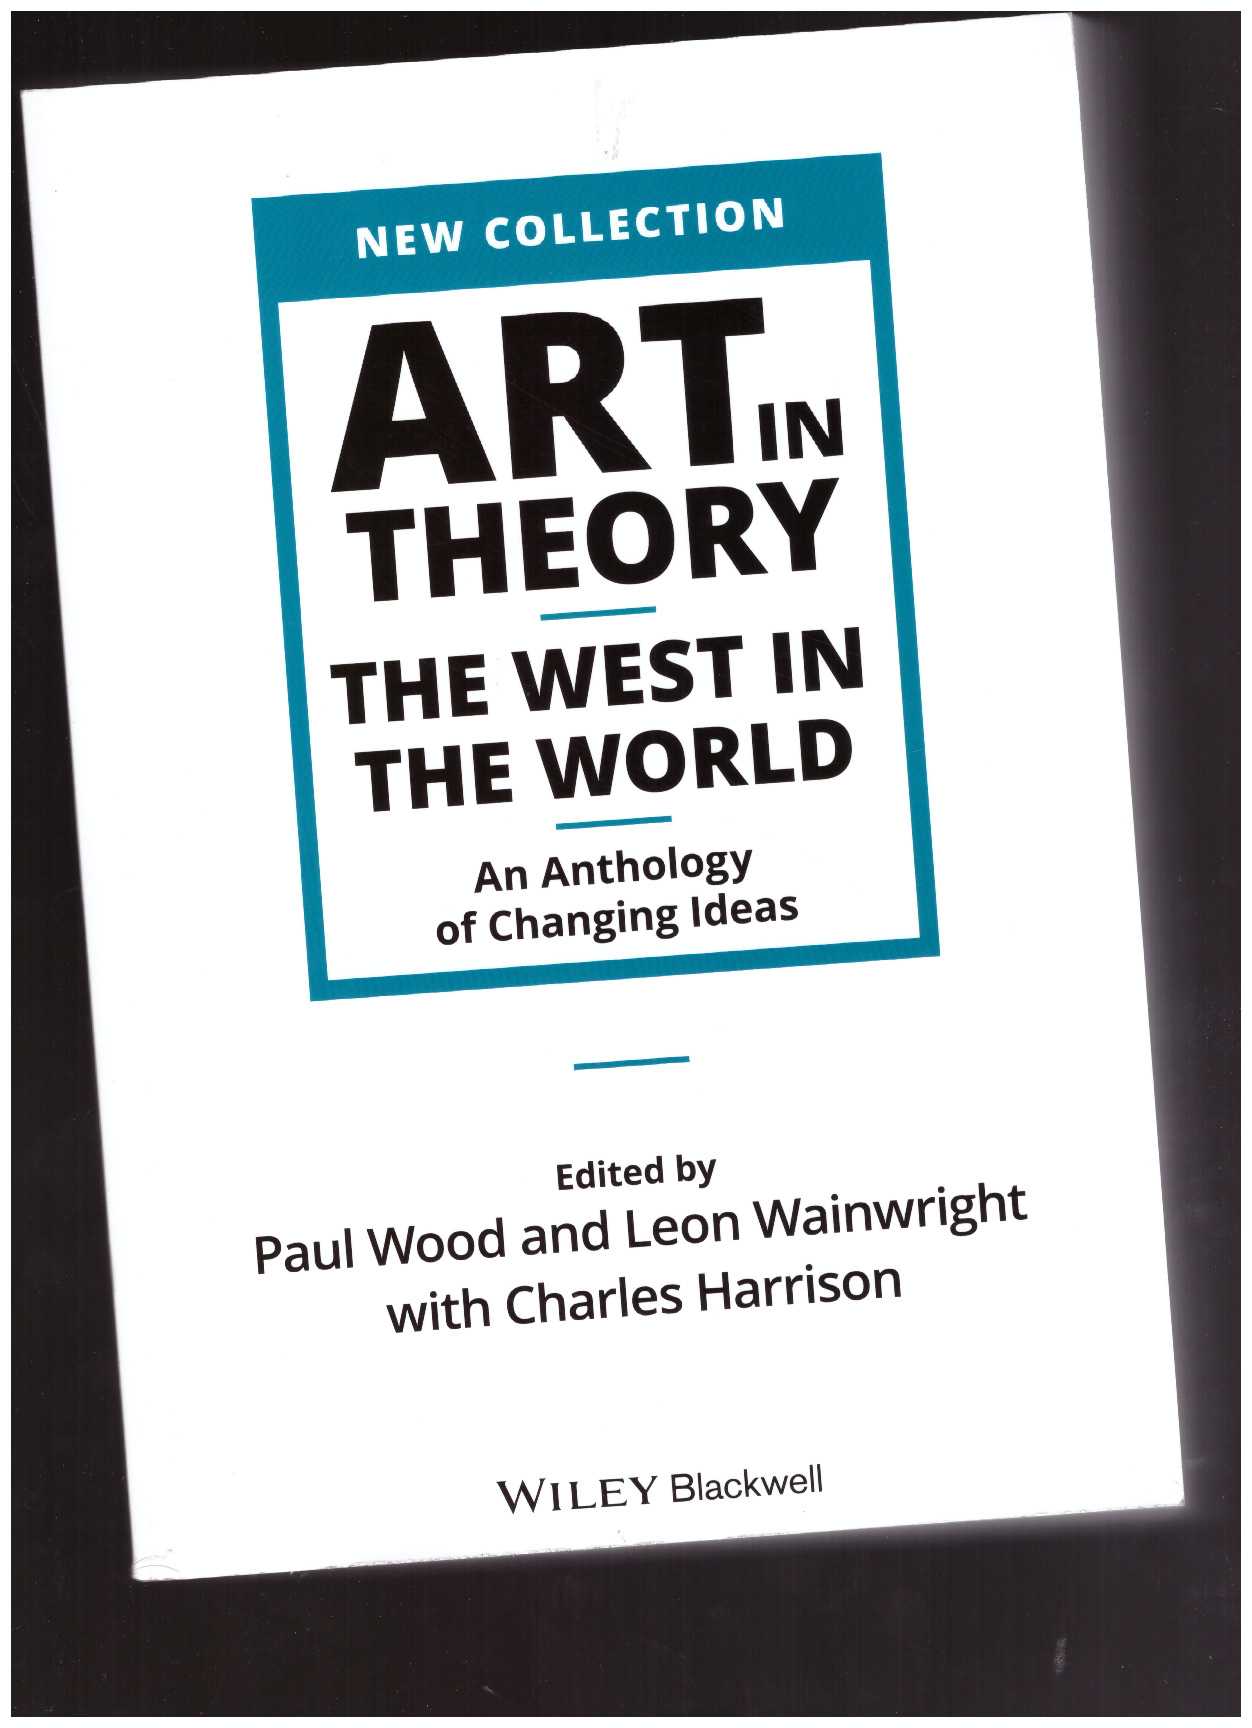 HARRISON, Charles; WAINWRIGHT, Leon; WOOD, Paul (eds.) - Art in Theory: The West in the World